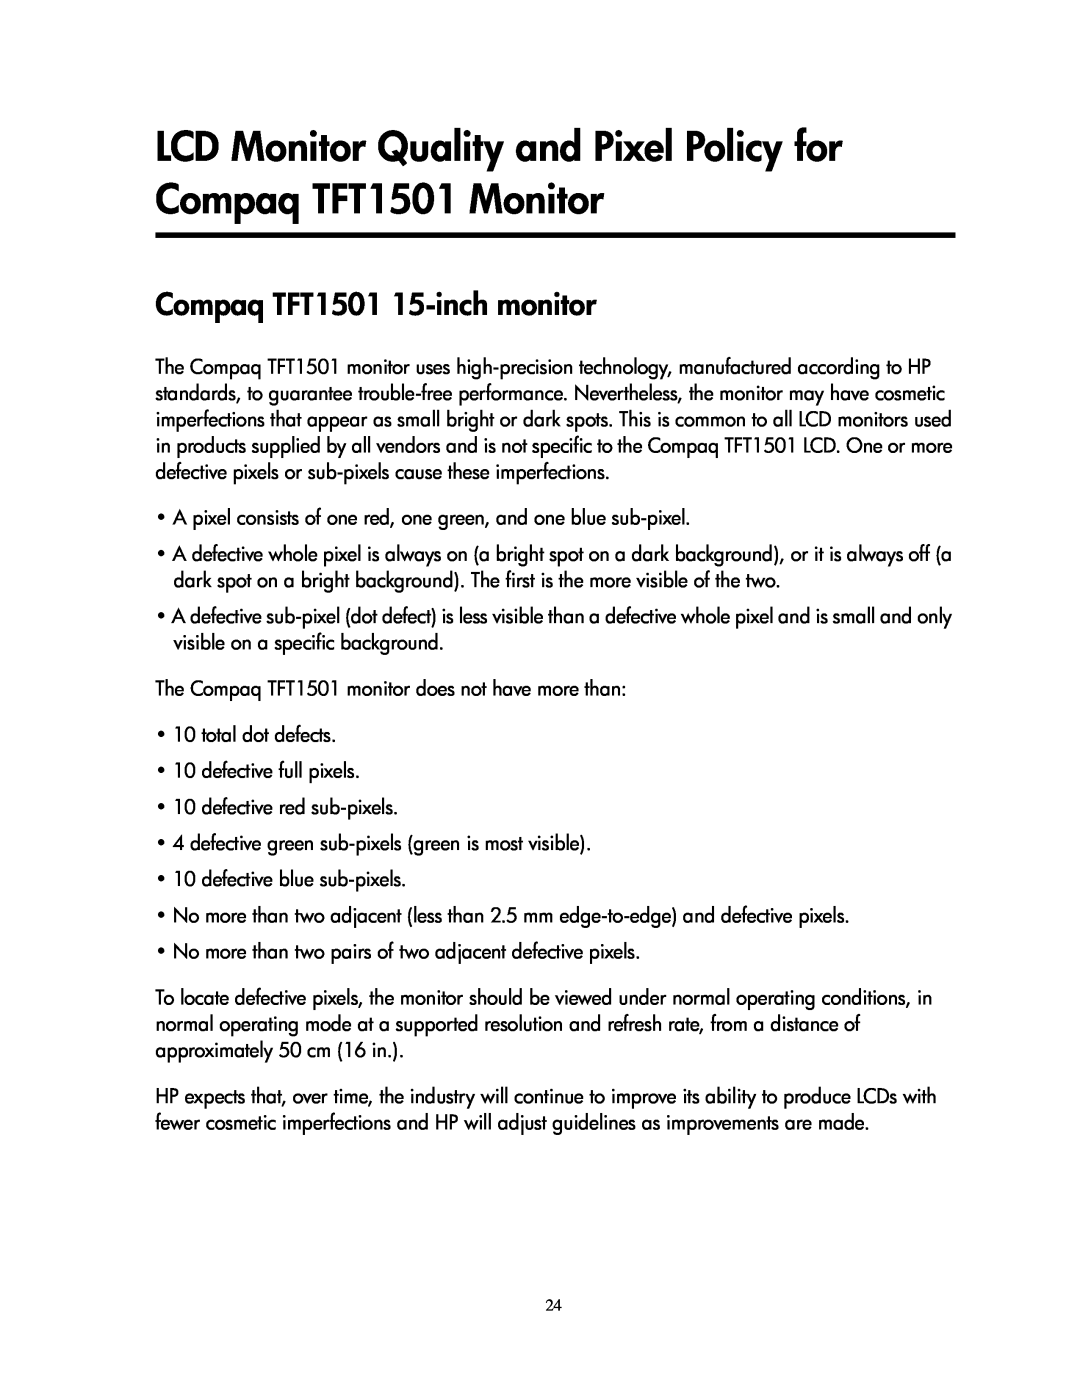 Compaq manual LCD Monitor Quality and Pixel Policy for Compaq TFT1501 Monitor, Compaq TFT1501 15-inch monitor 